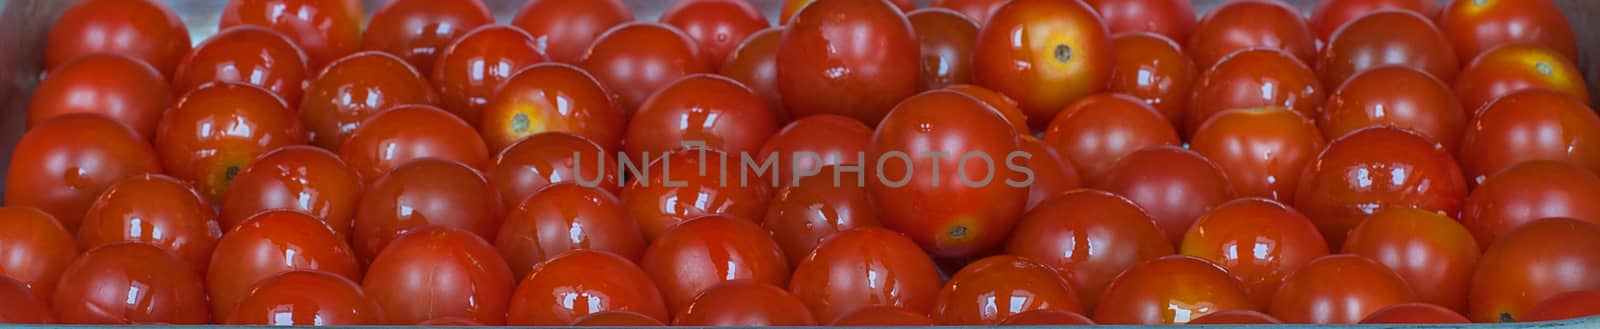 rows of cherry tomatoes by sirspread